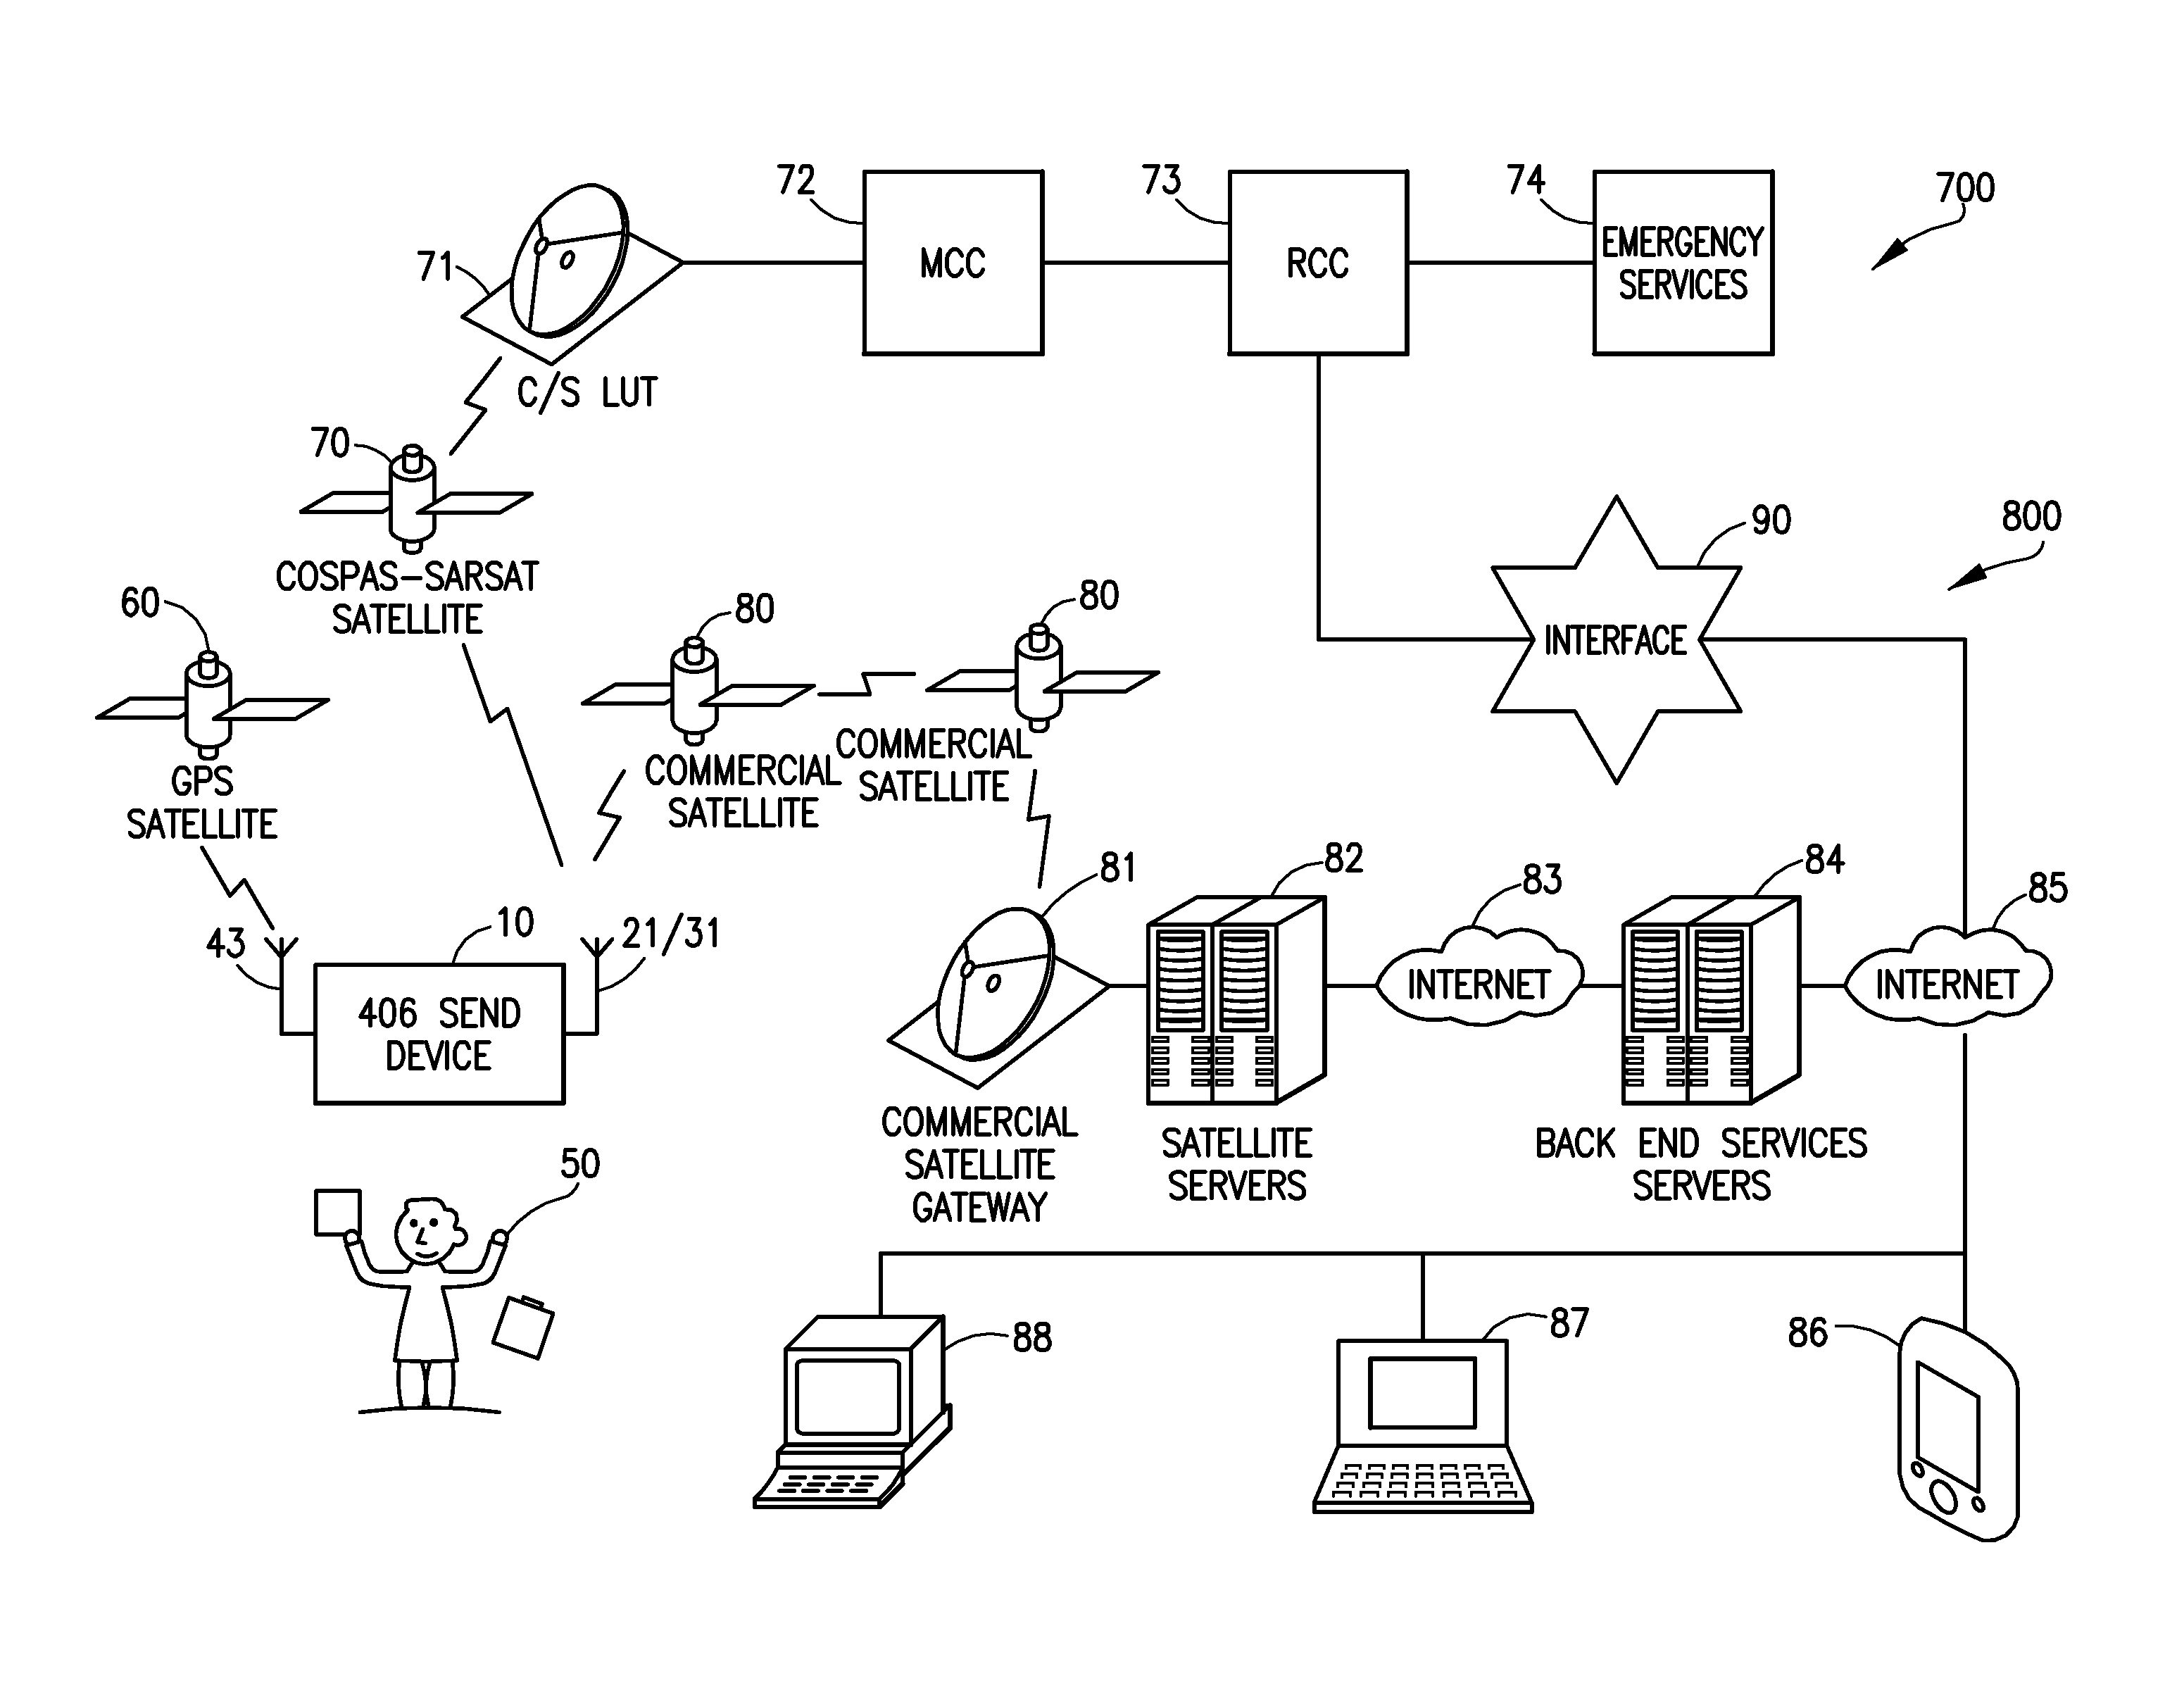 Dual-satellite emergency locator beacon and method for registering, programming and updating emergency locator beacon over the air